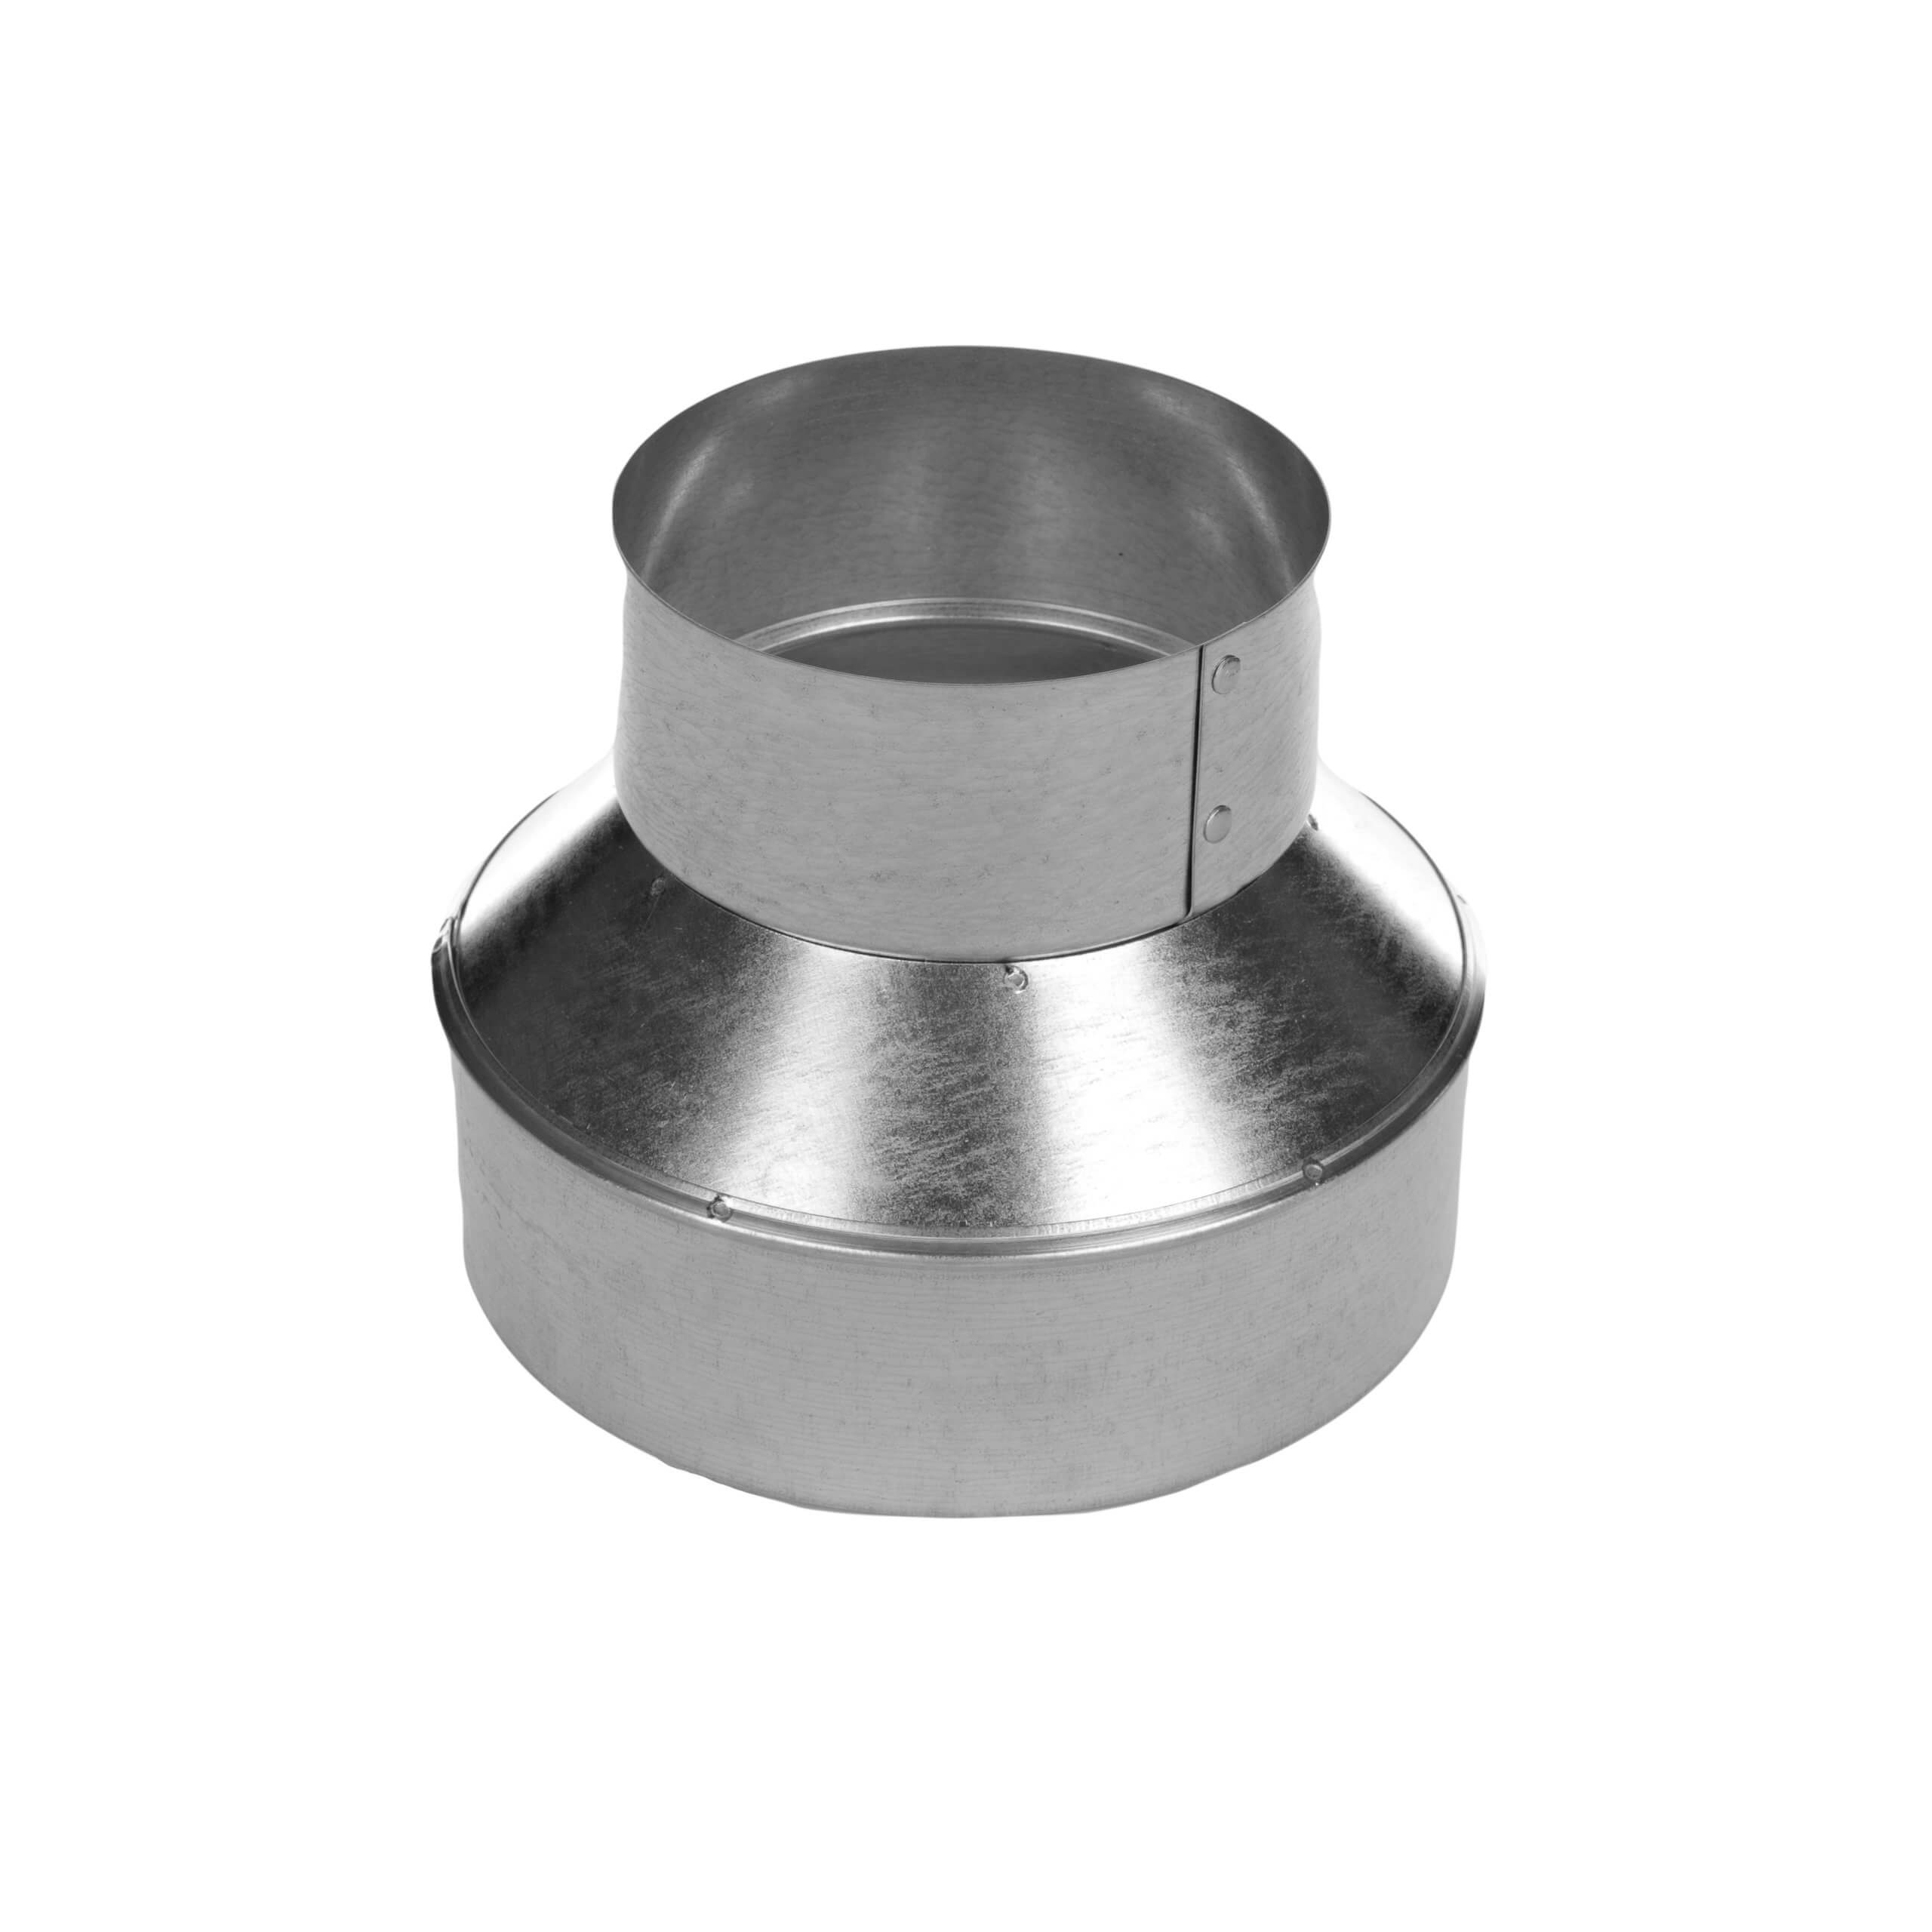 12x8 Round Duct Reducer 12" to 8" Adapter 